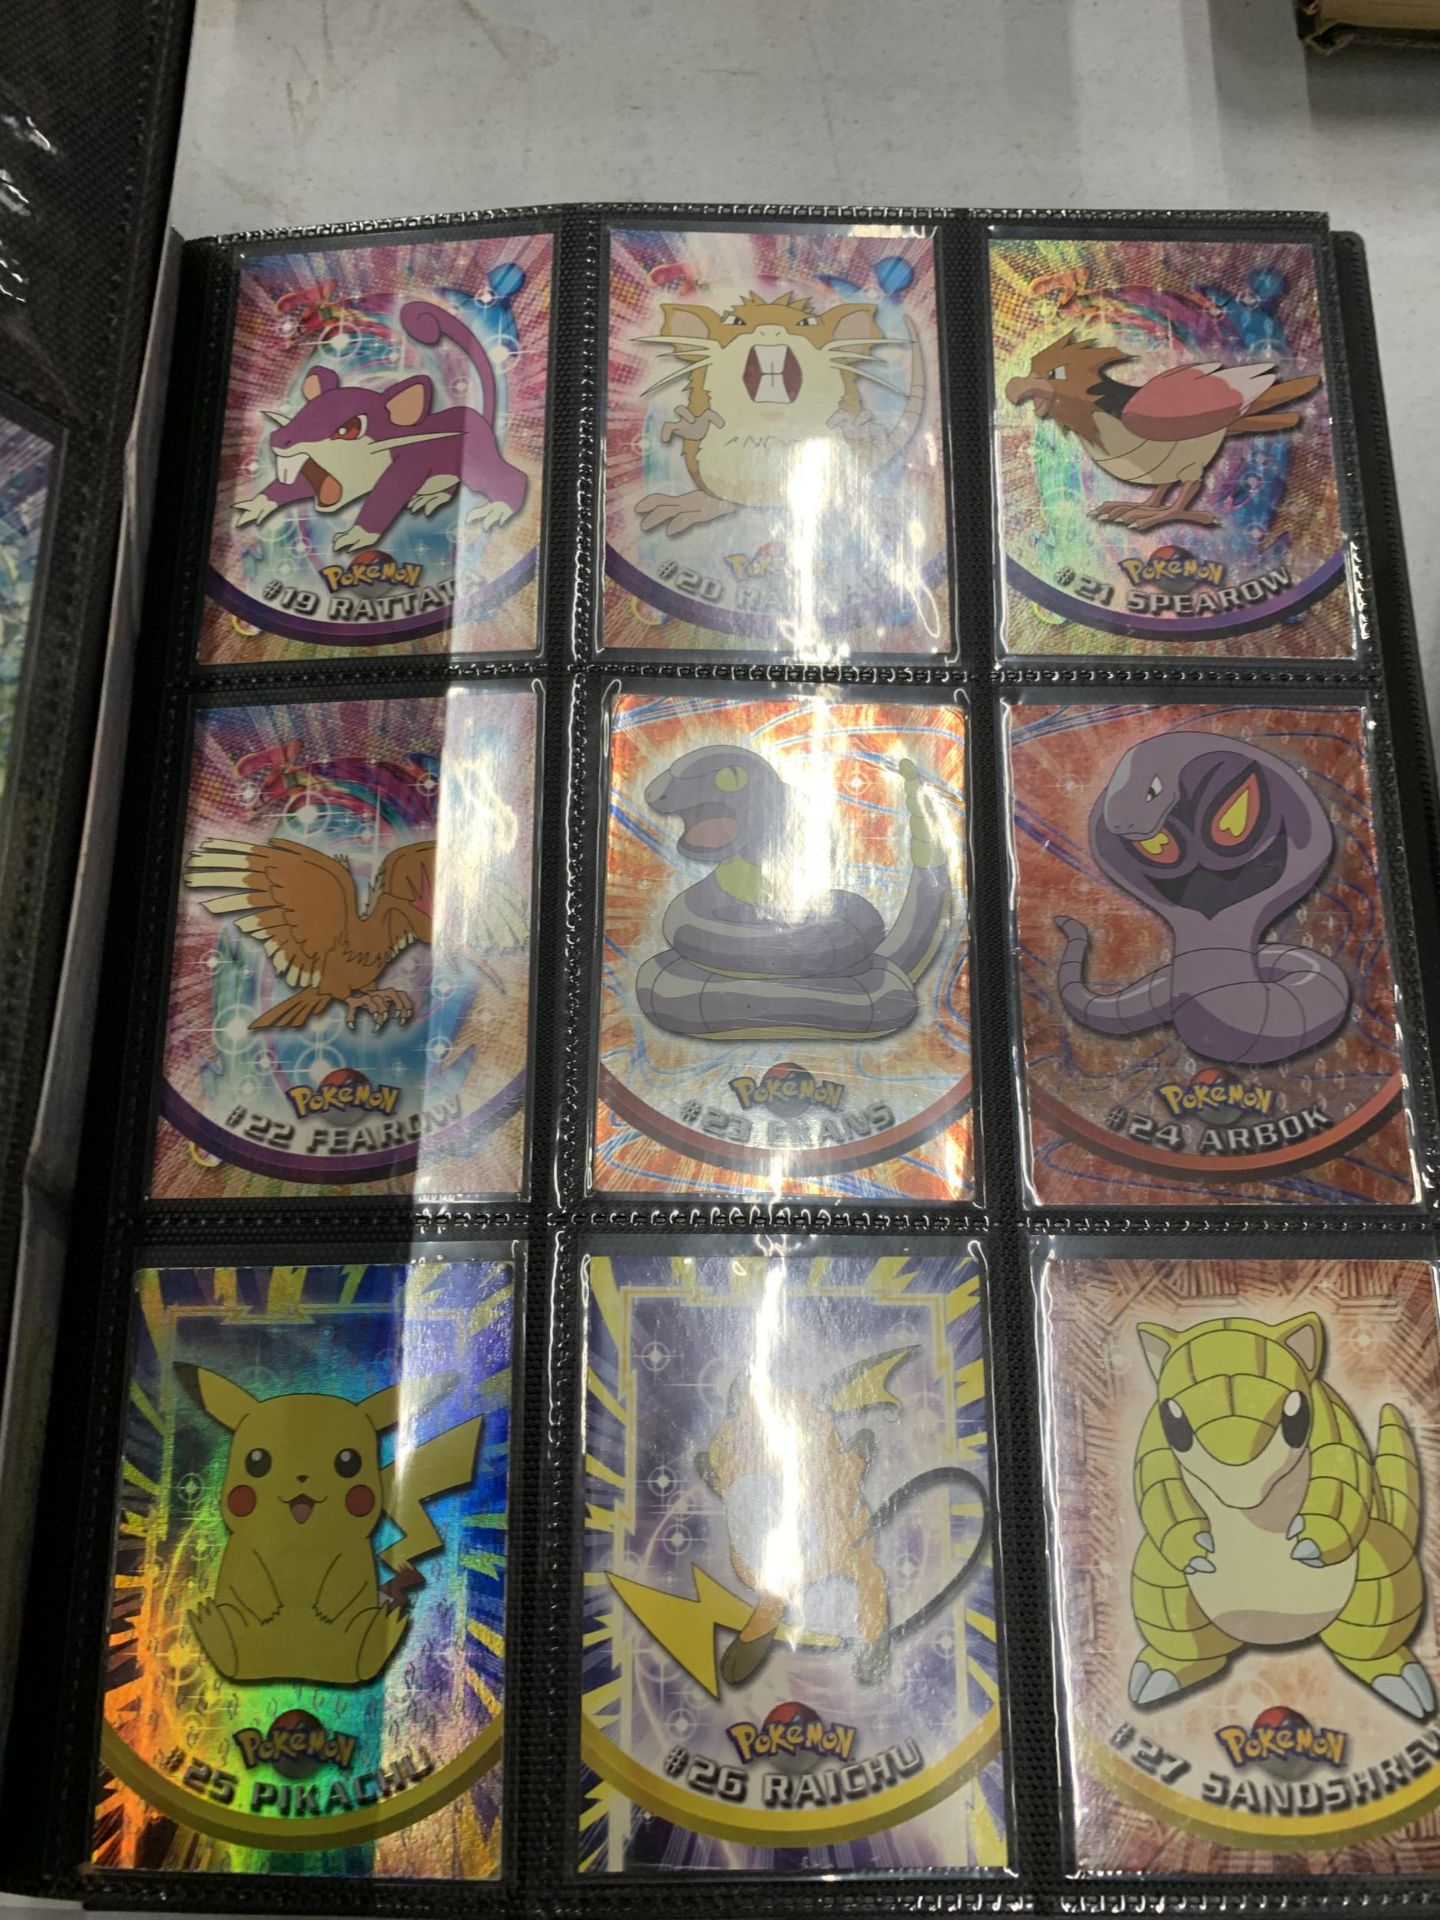 A FOLDER OF POKEMON CARDS TO INCLUDE 1999 BASE SET, TOPPS SERIES 1 INCLUDING CHARIZARD AND HOLOS - Image 5 of 5